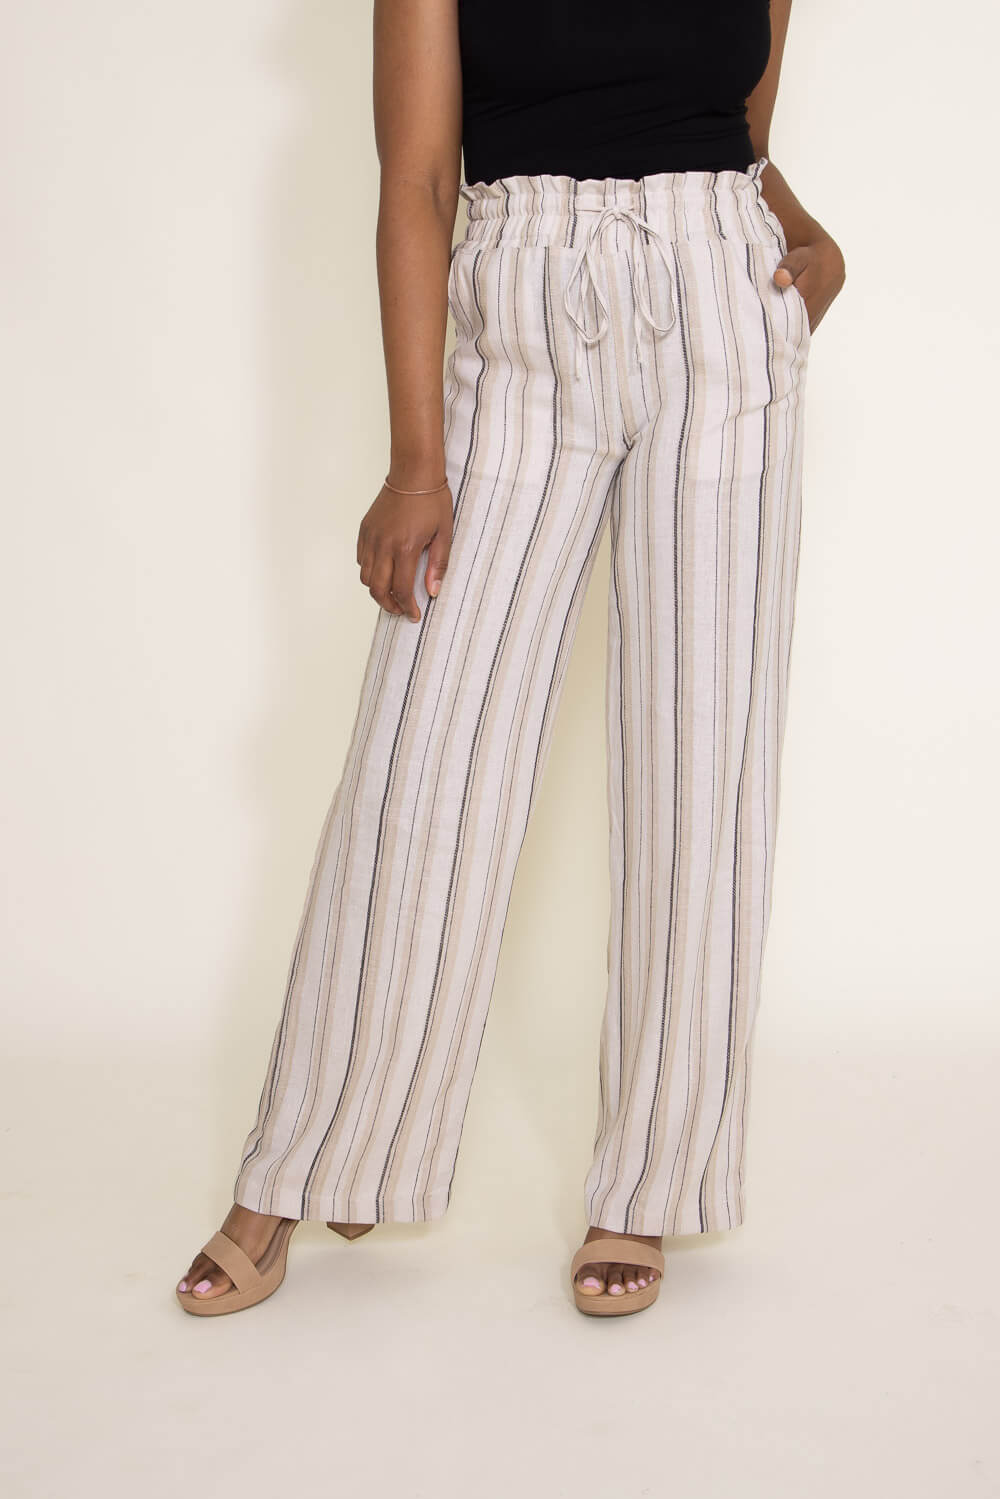 WOMEN'S COTTON RELAXED ANKLE PANTS (STRIPED) | UNIQLO IN